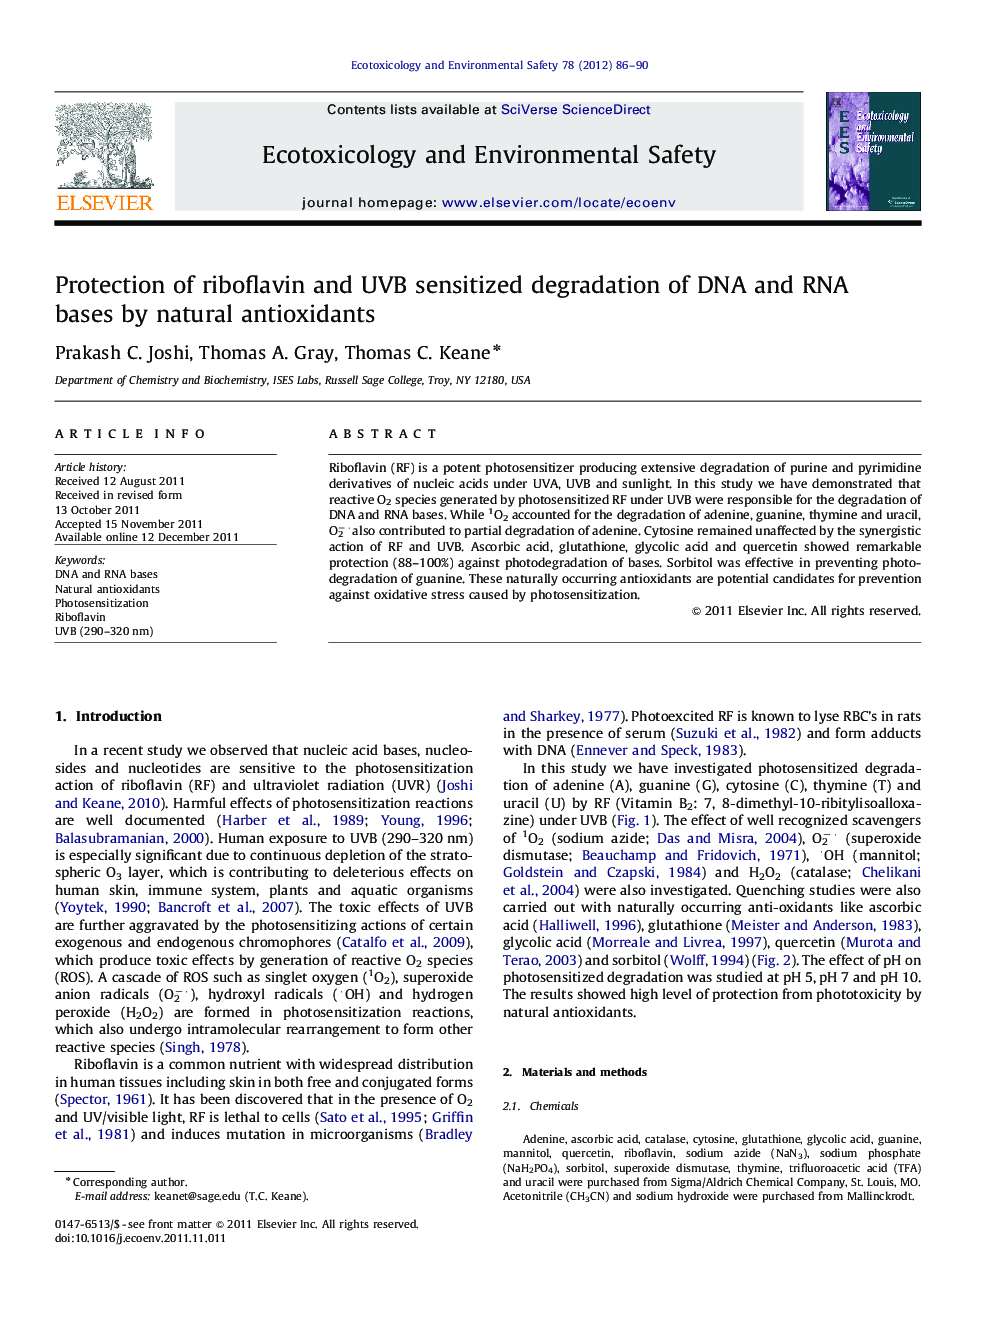 Protection of riboflavin and UVB sensitized degradation of DNA and RNA bases by natural antioxidants